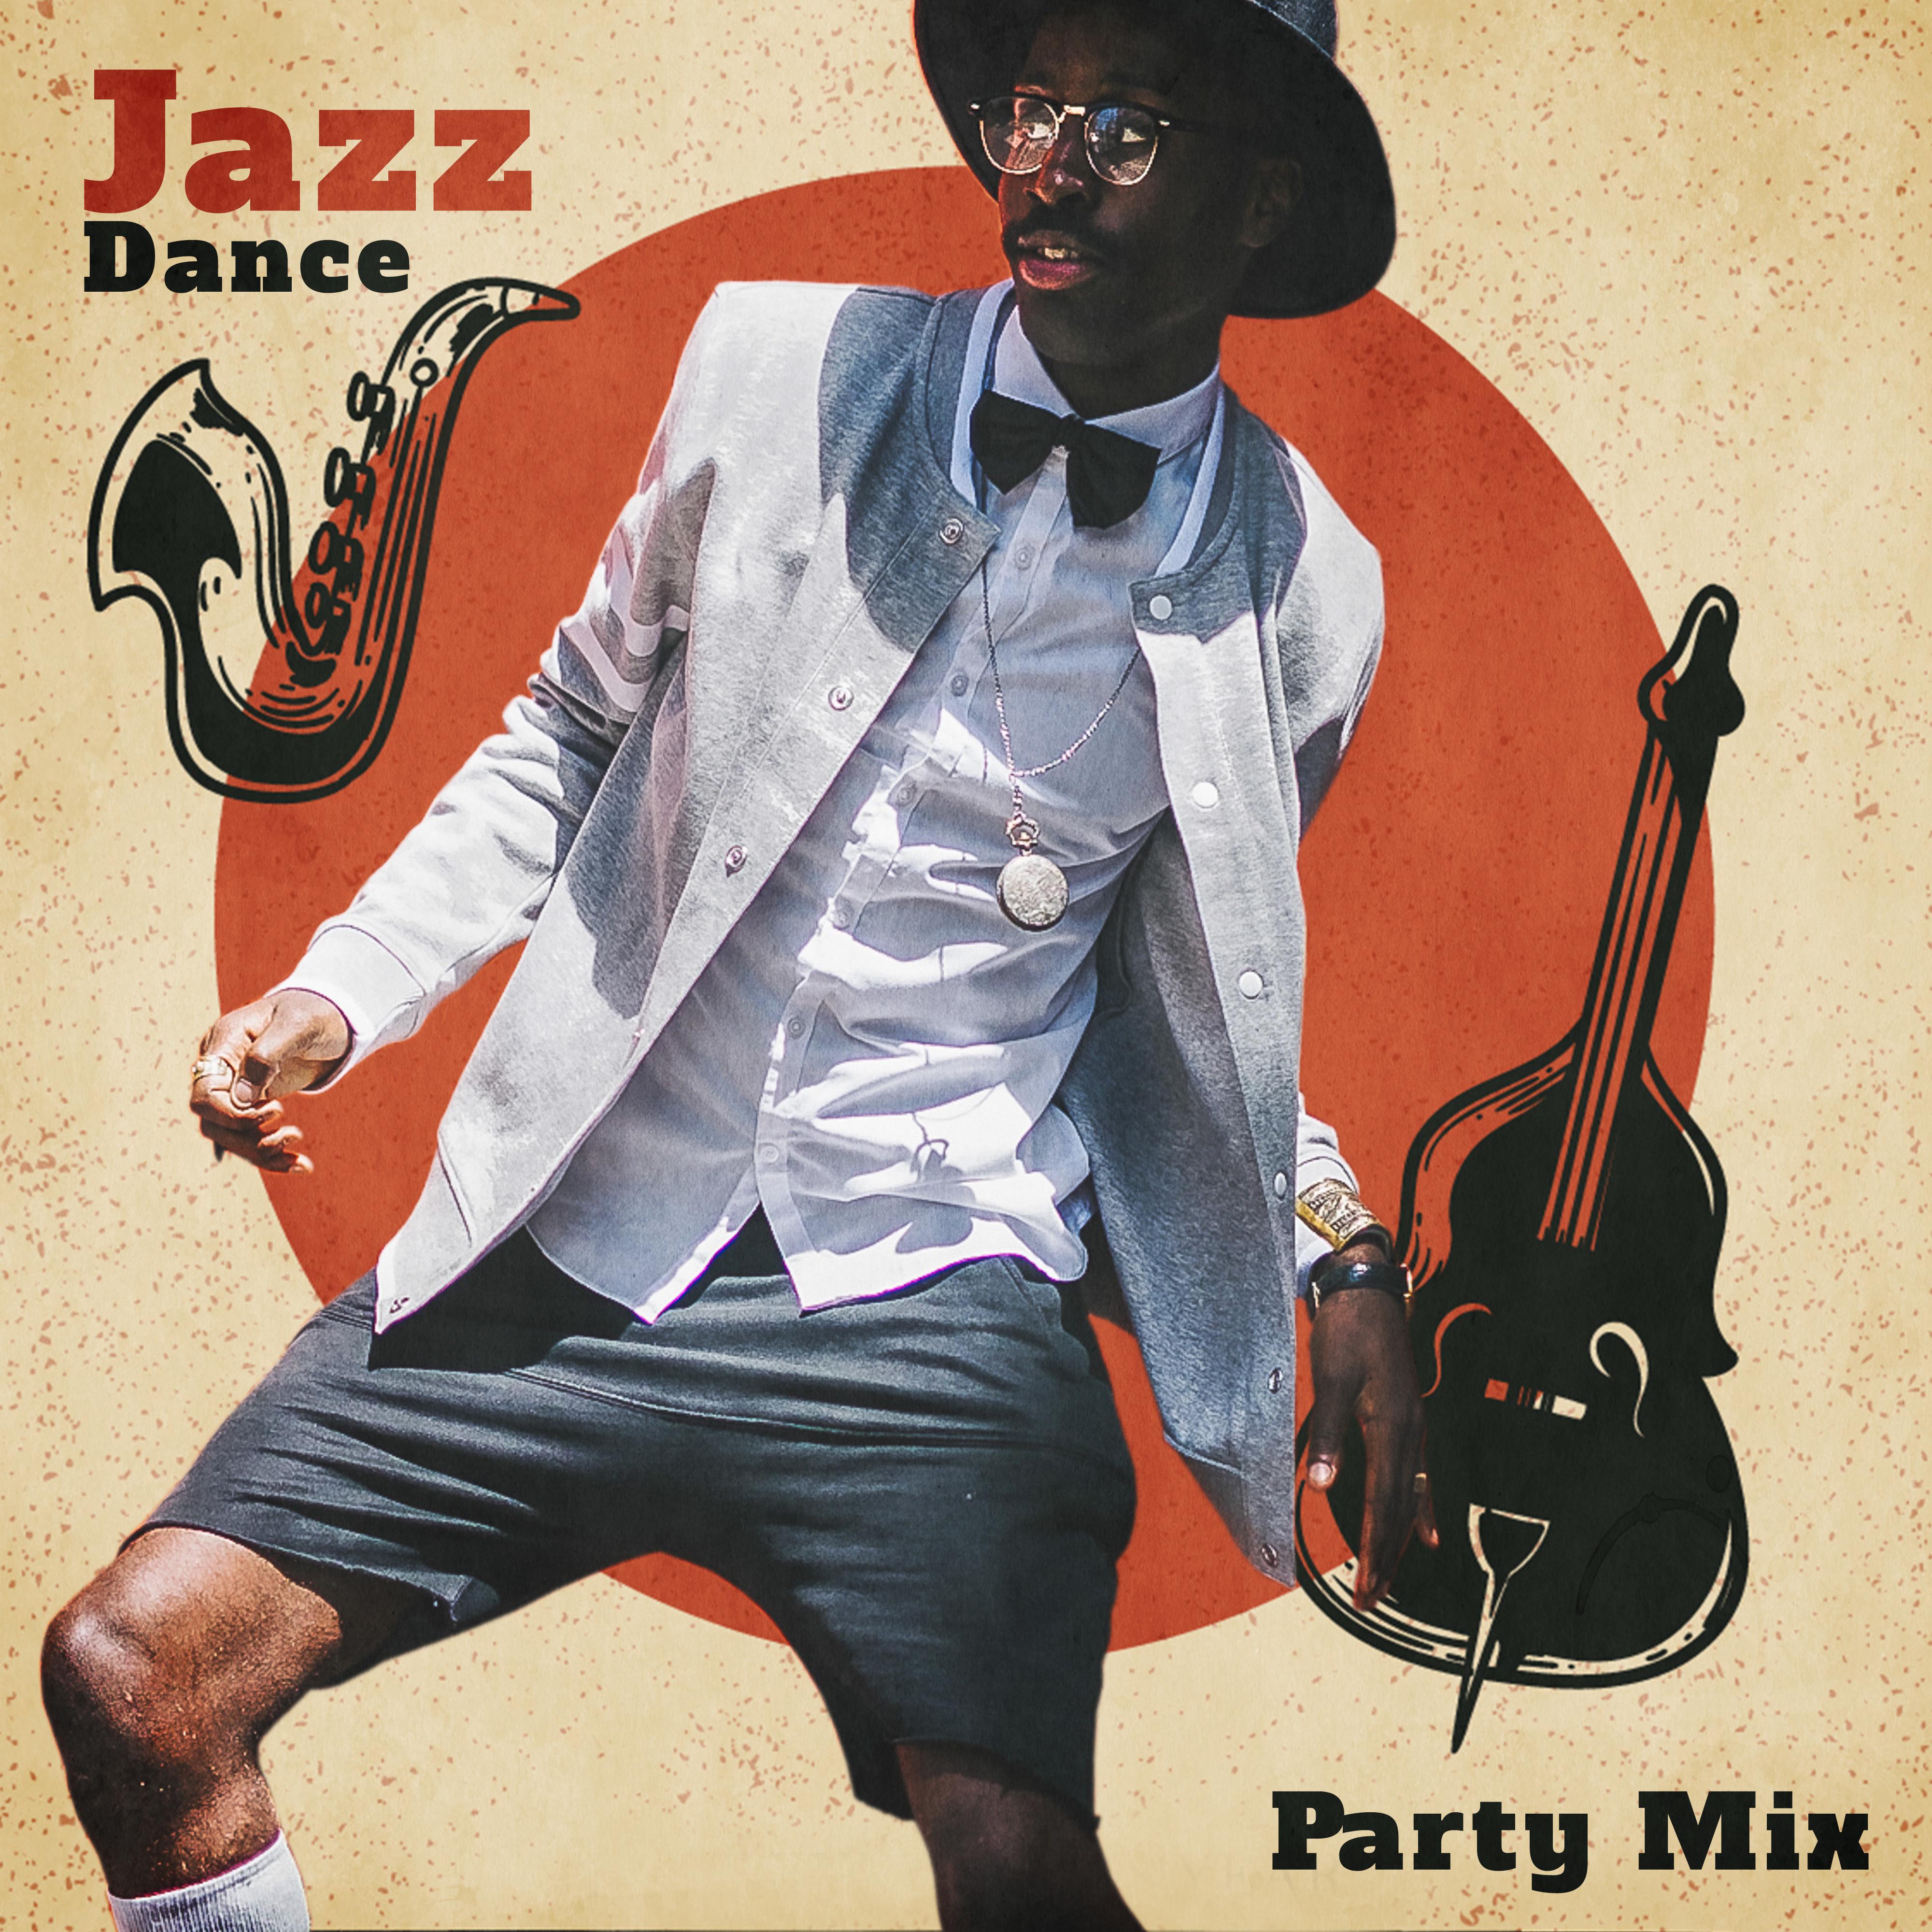 Jazz Dance Party Mix  Music for Dancing All Night Long, Carnival Instrumental Jazz Melodies